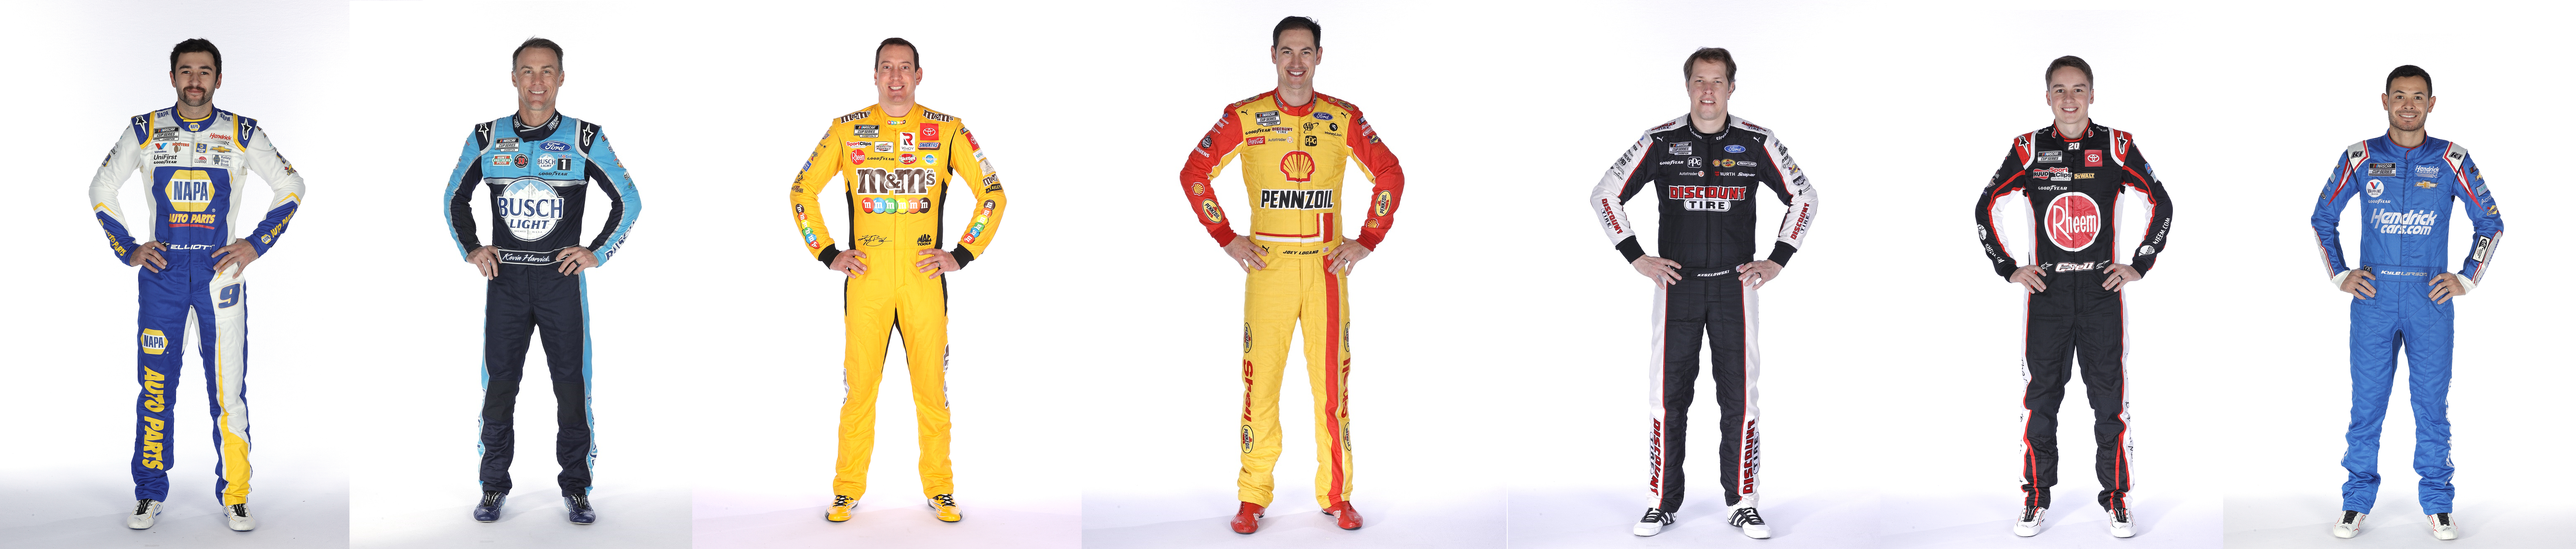 Can one of these magnificent seven win Sunday's Instacart 500 at Phoenix?